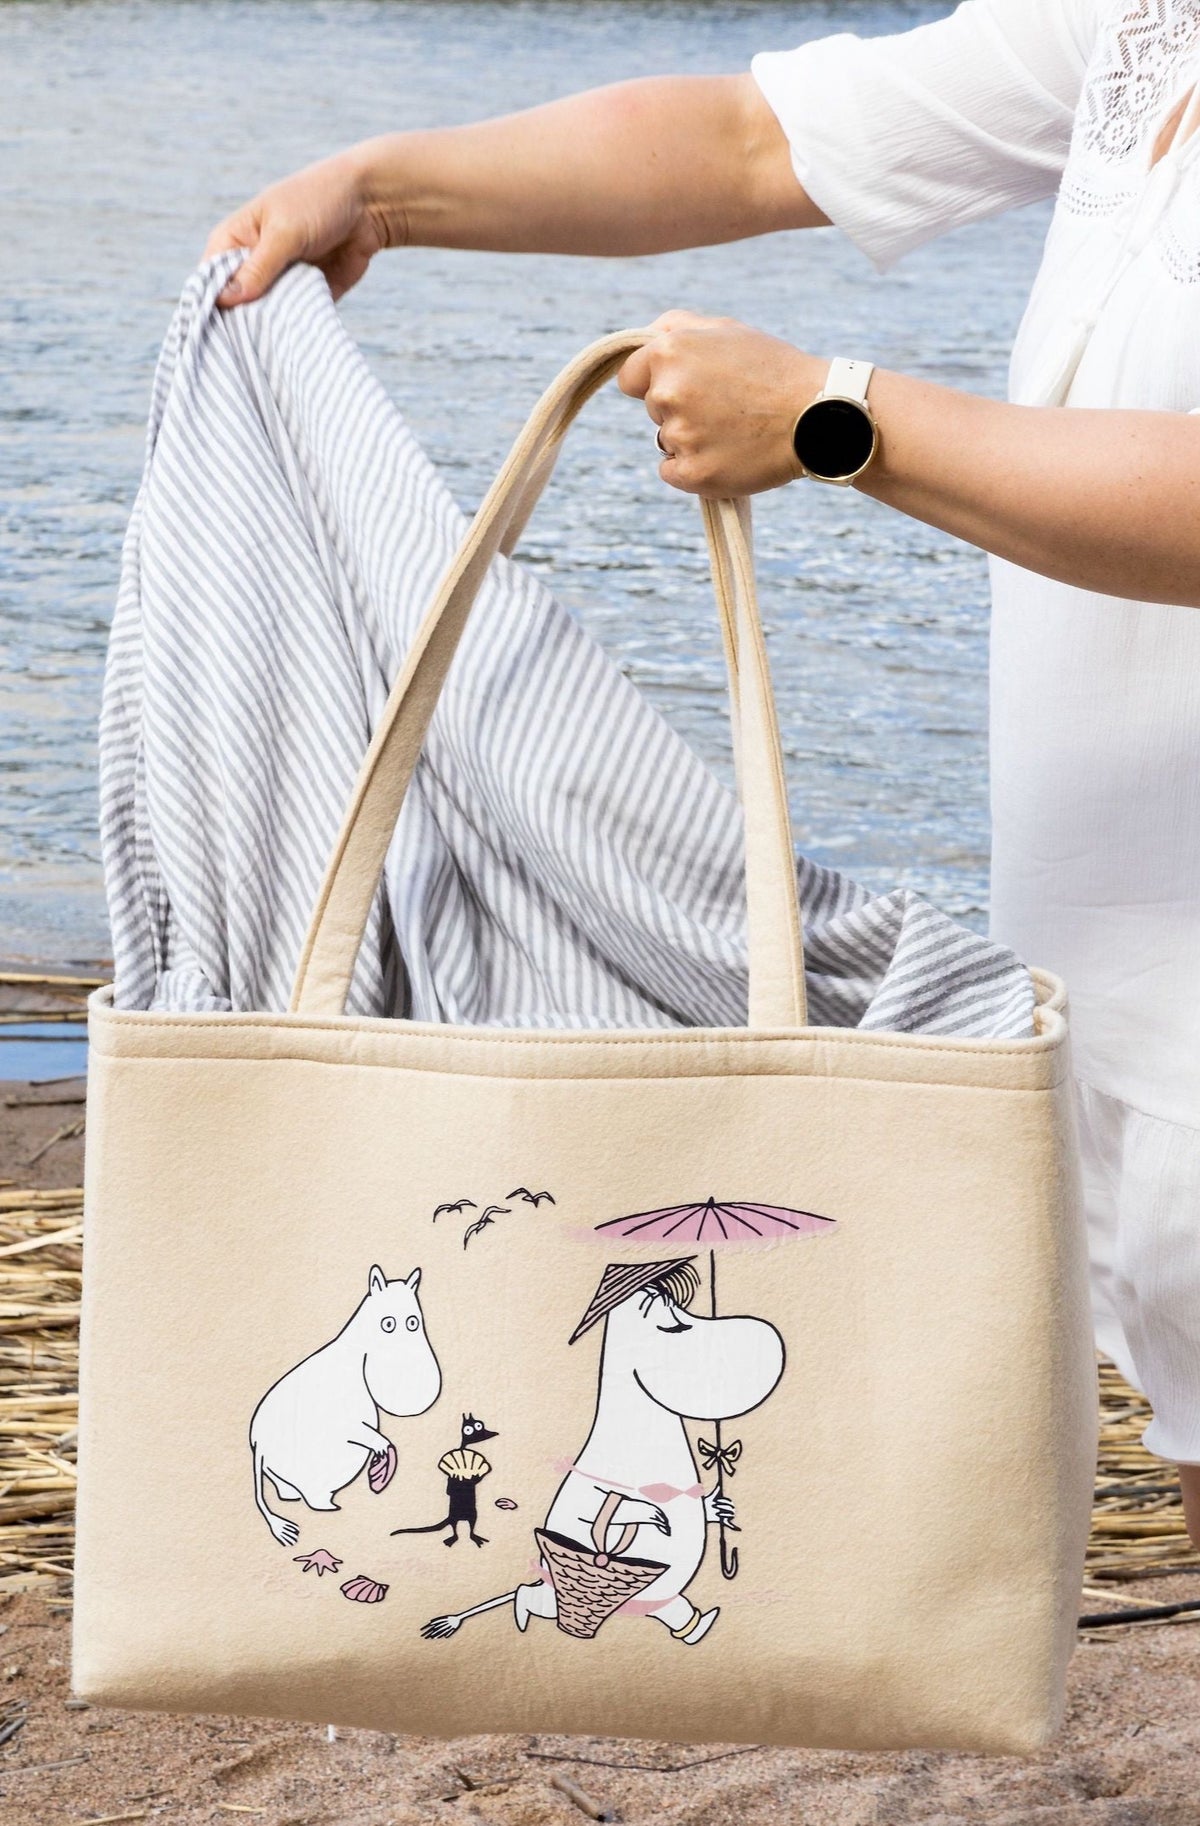 The Moomin Beach Bag by Muurla in use at the seaside.